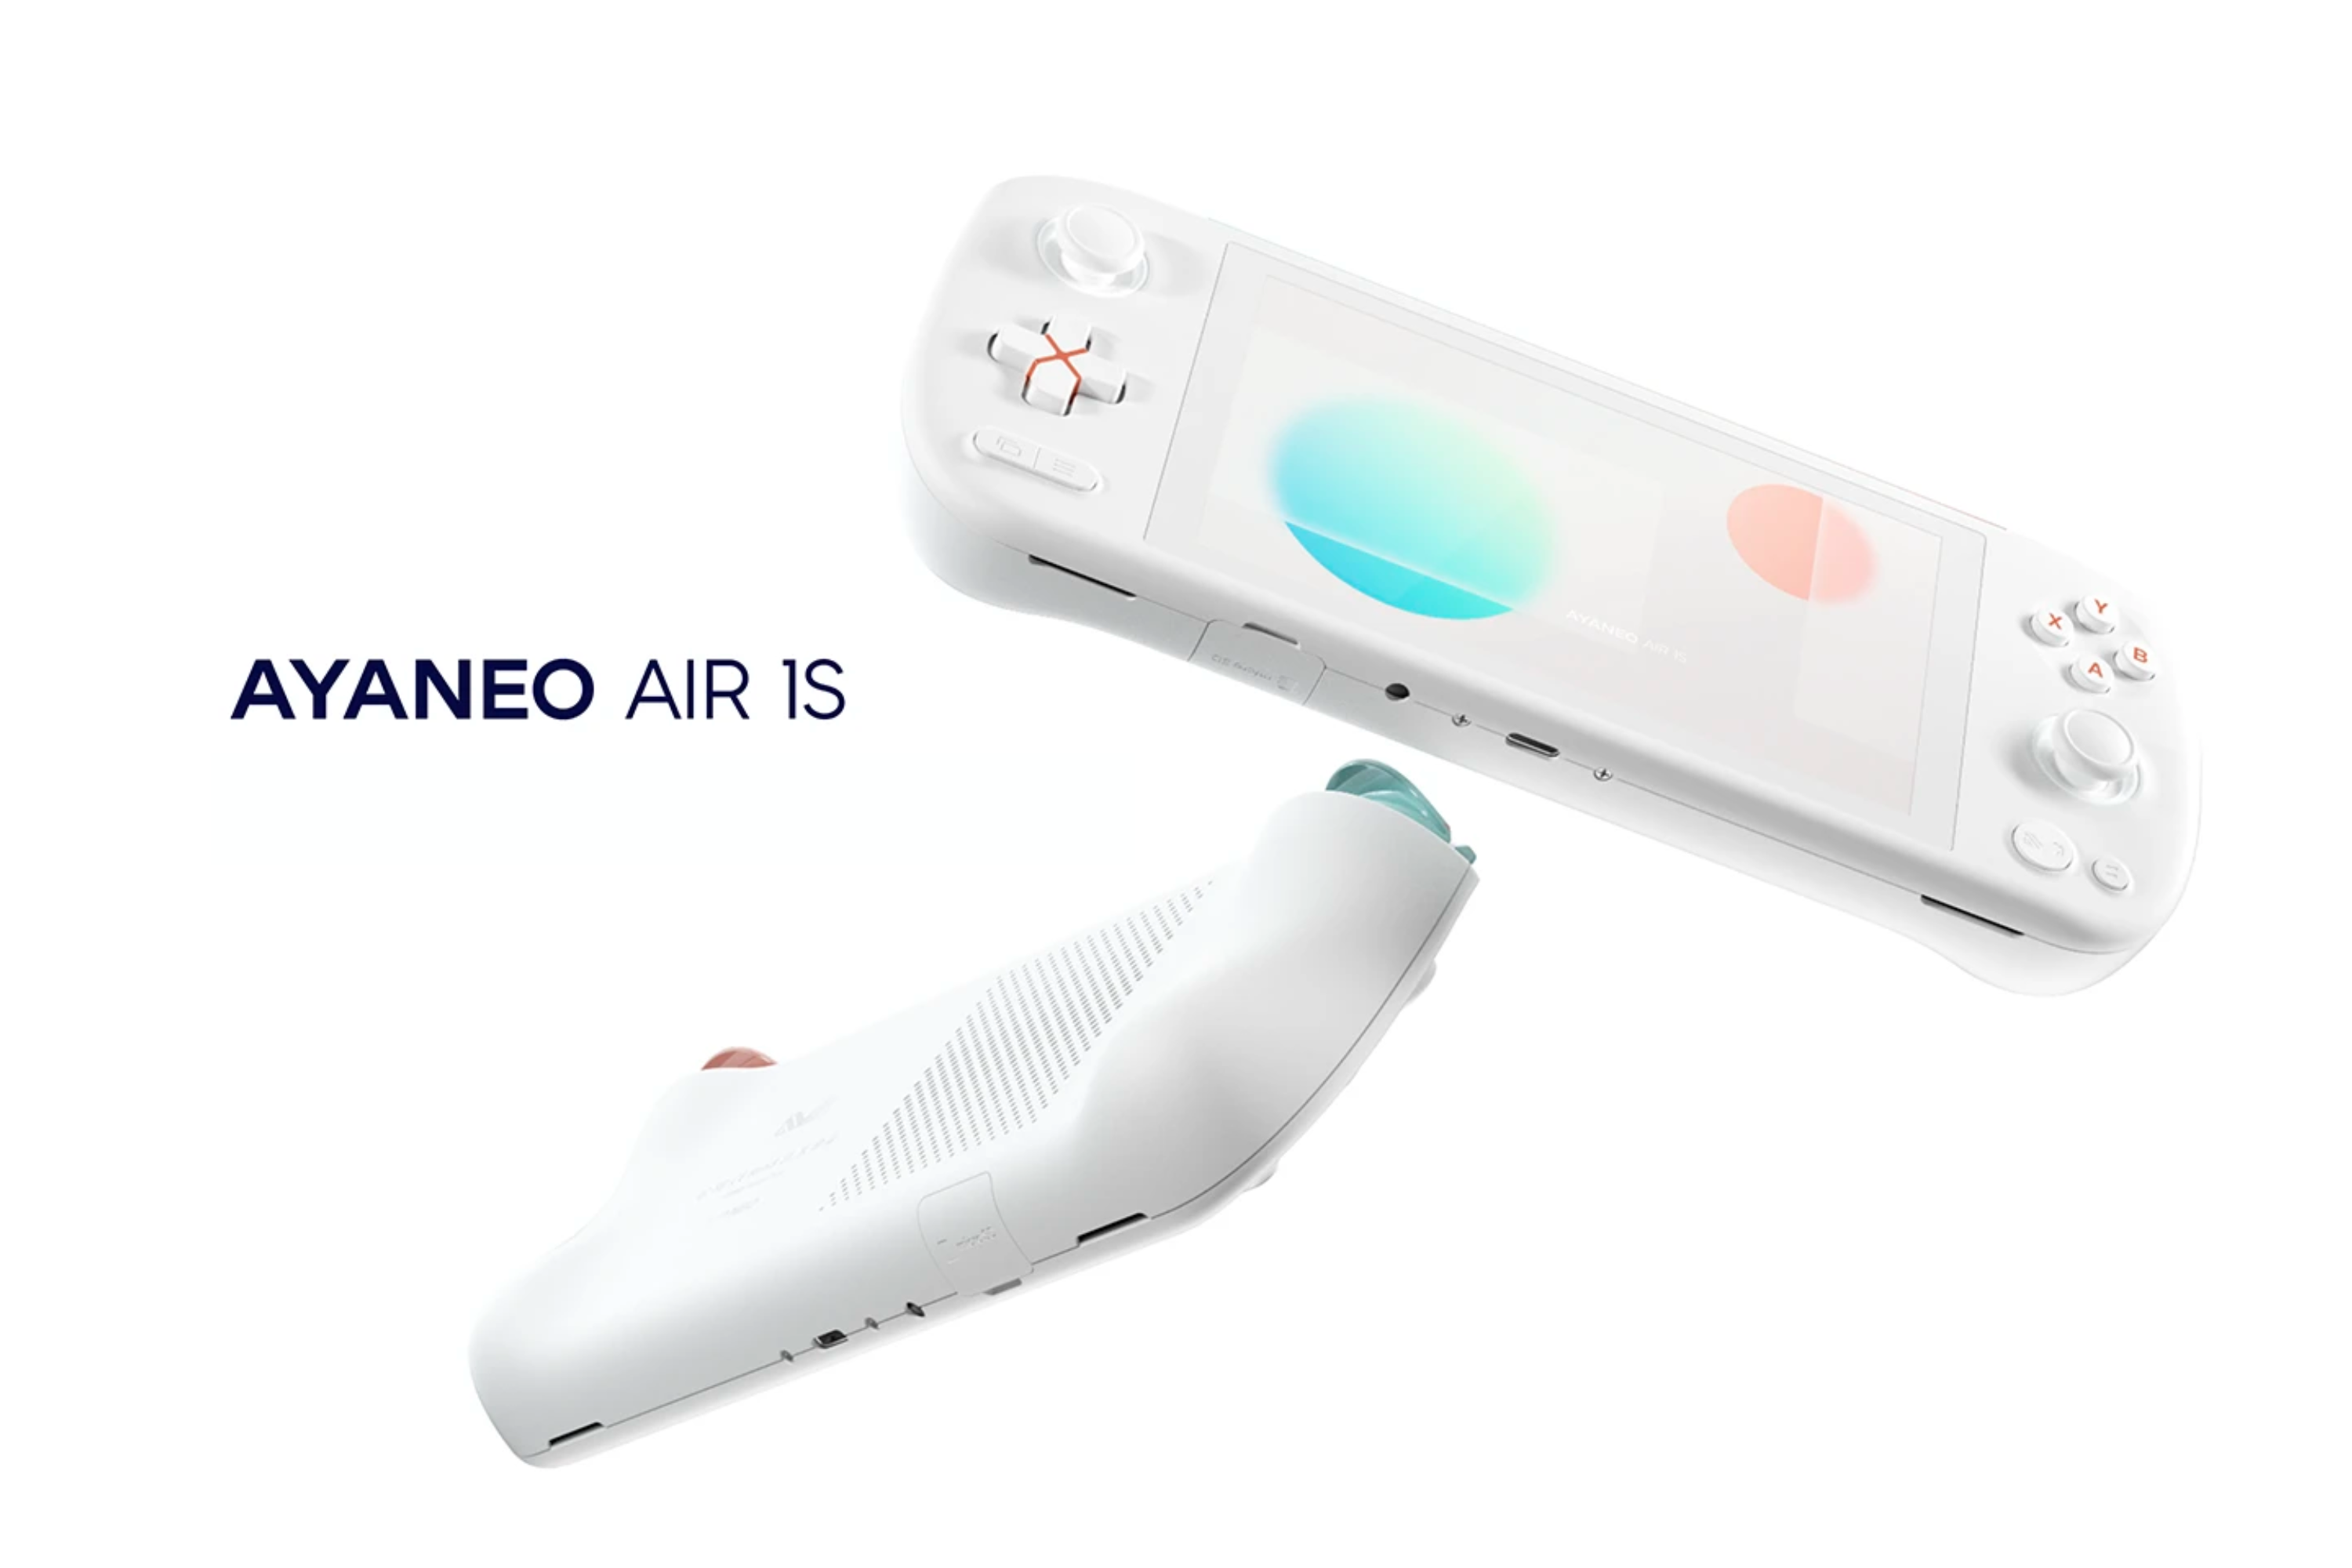 Ayaneo Air 1S is a new compact gaming handheld powered by AMD's 7840U